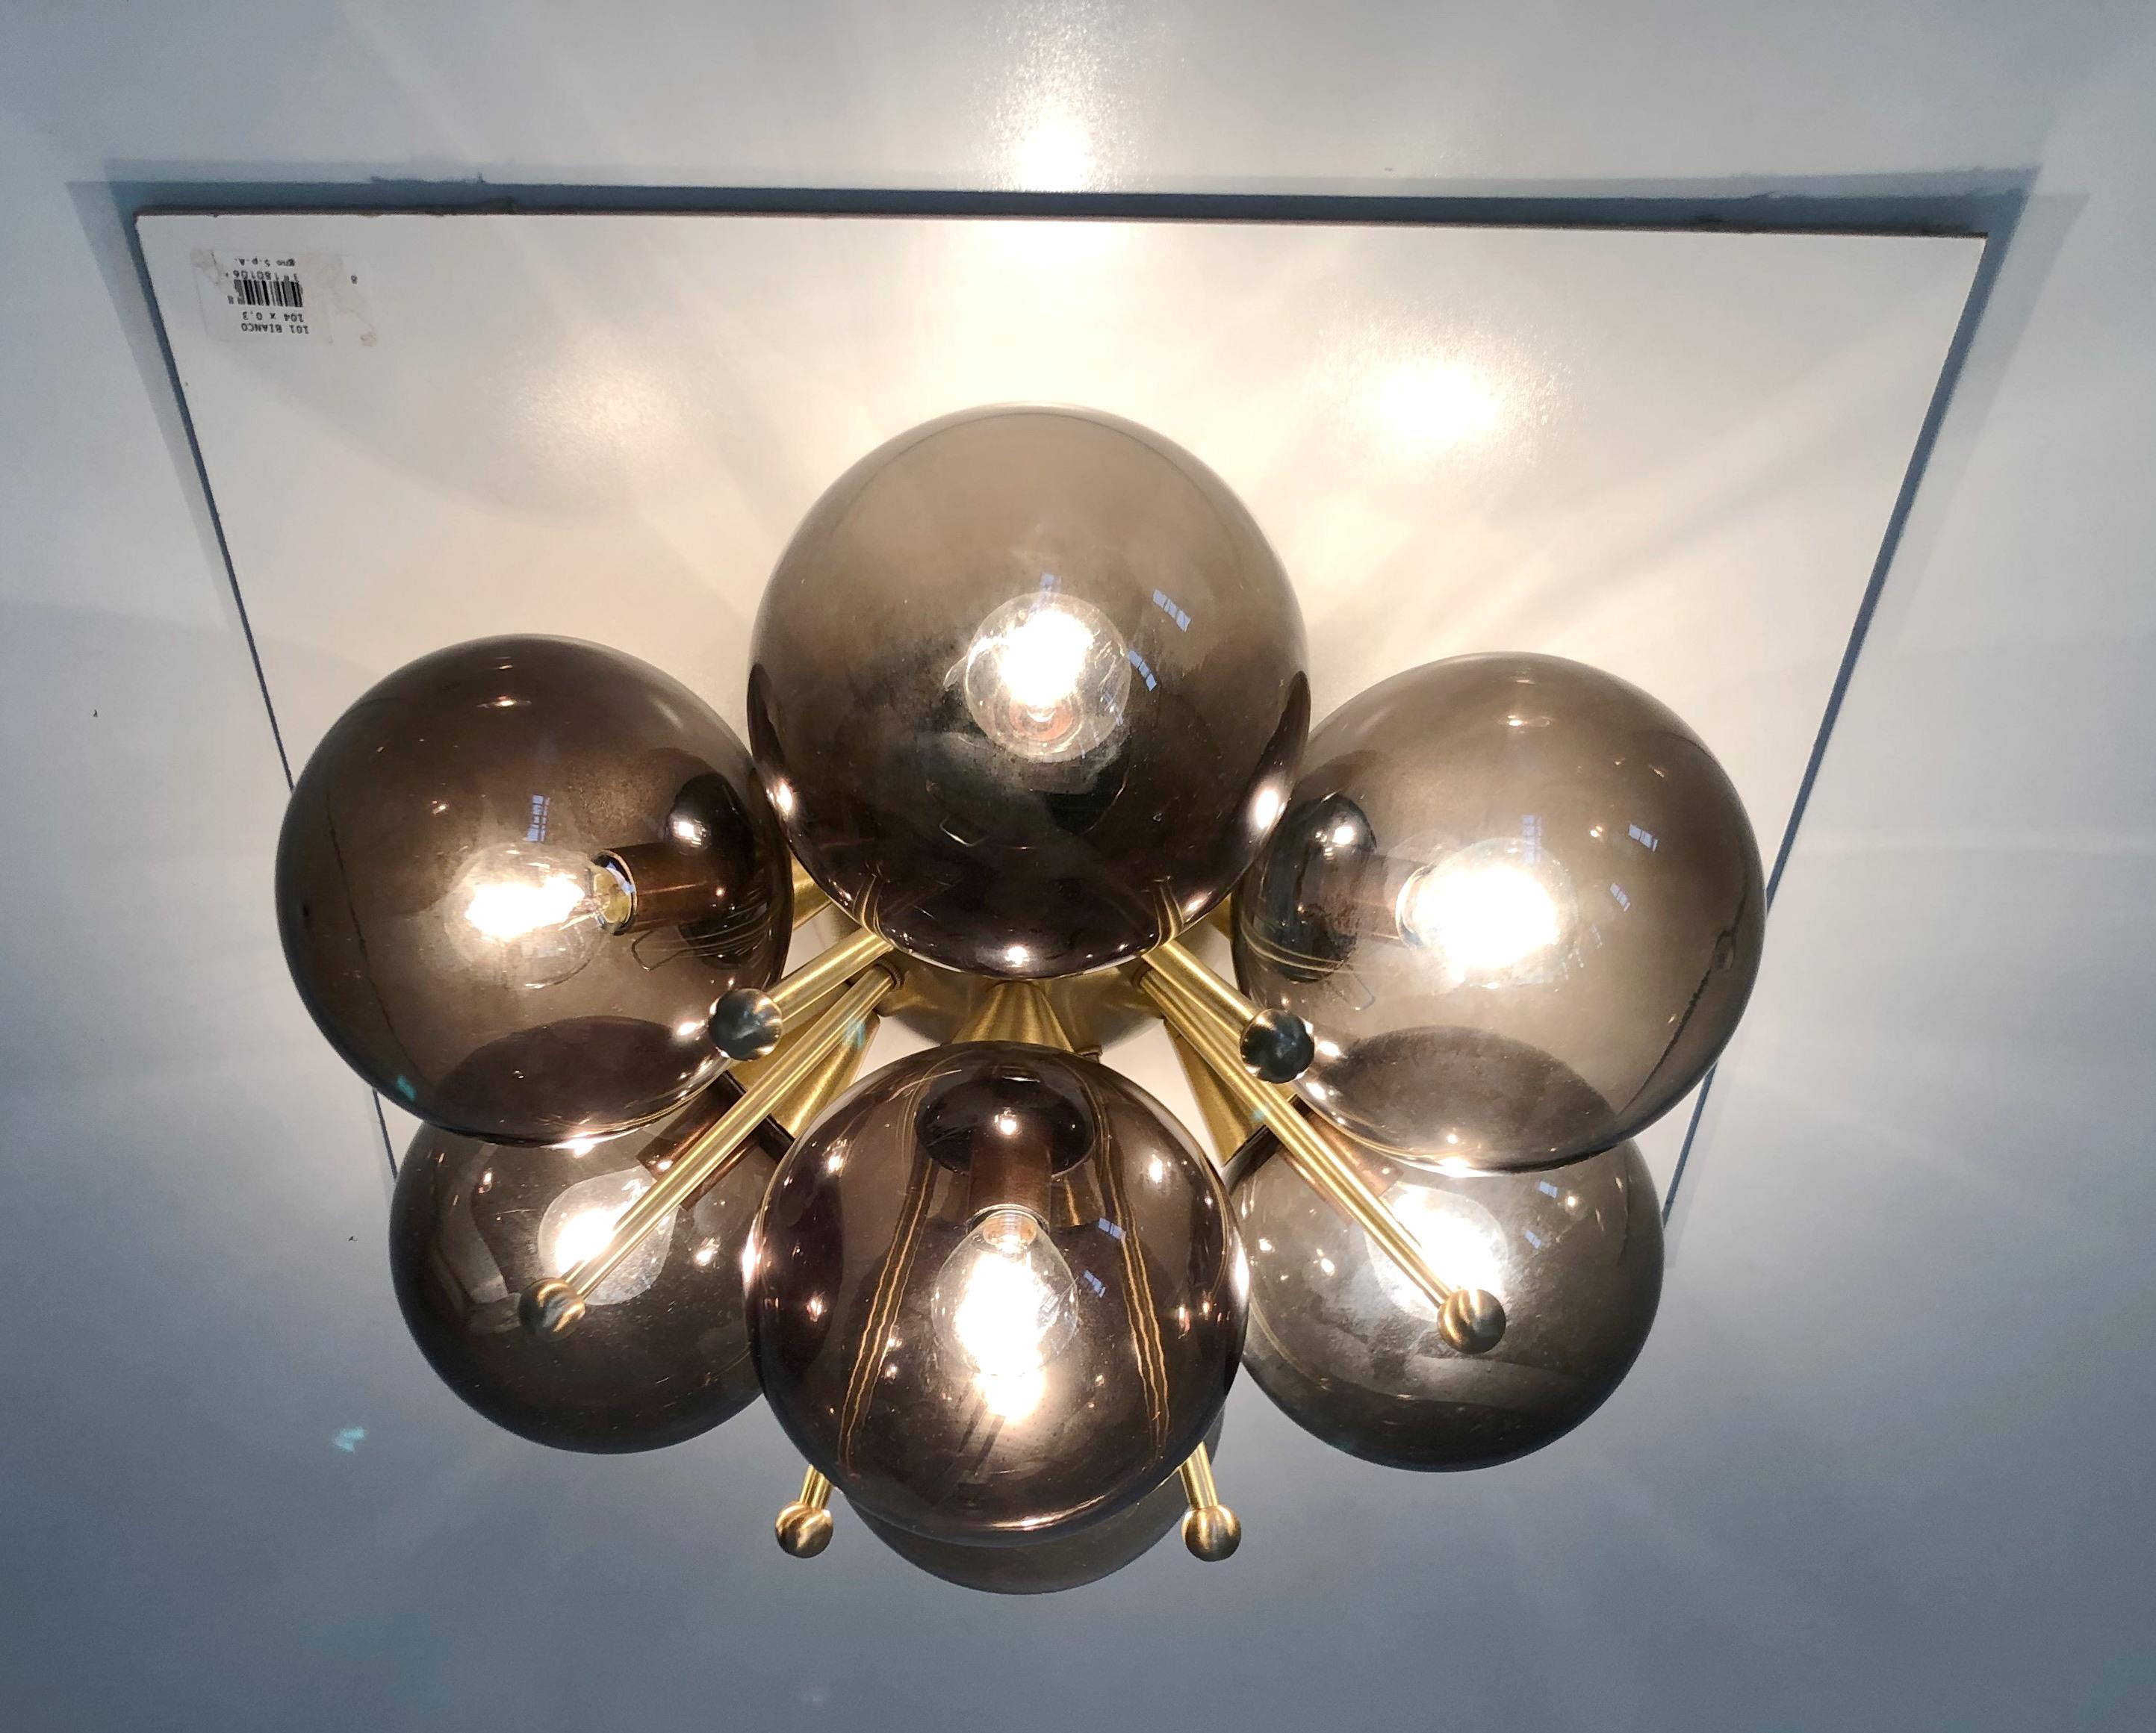 Italian flush mount with Murano glass globes mounted on solid brass frame 
Designed by Fabio Bergomi / Made in Italy 
7 lights / E12 or E14 type / max 40W each 
Diameter: 22 inches / Height: 11 inches 
Order only / This item ships from Italy 
Order